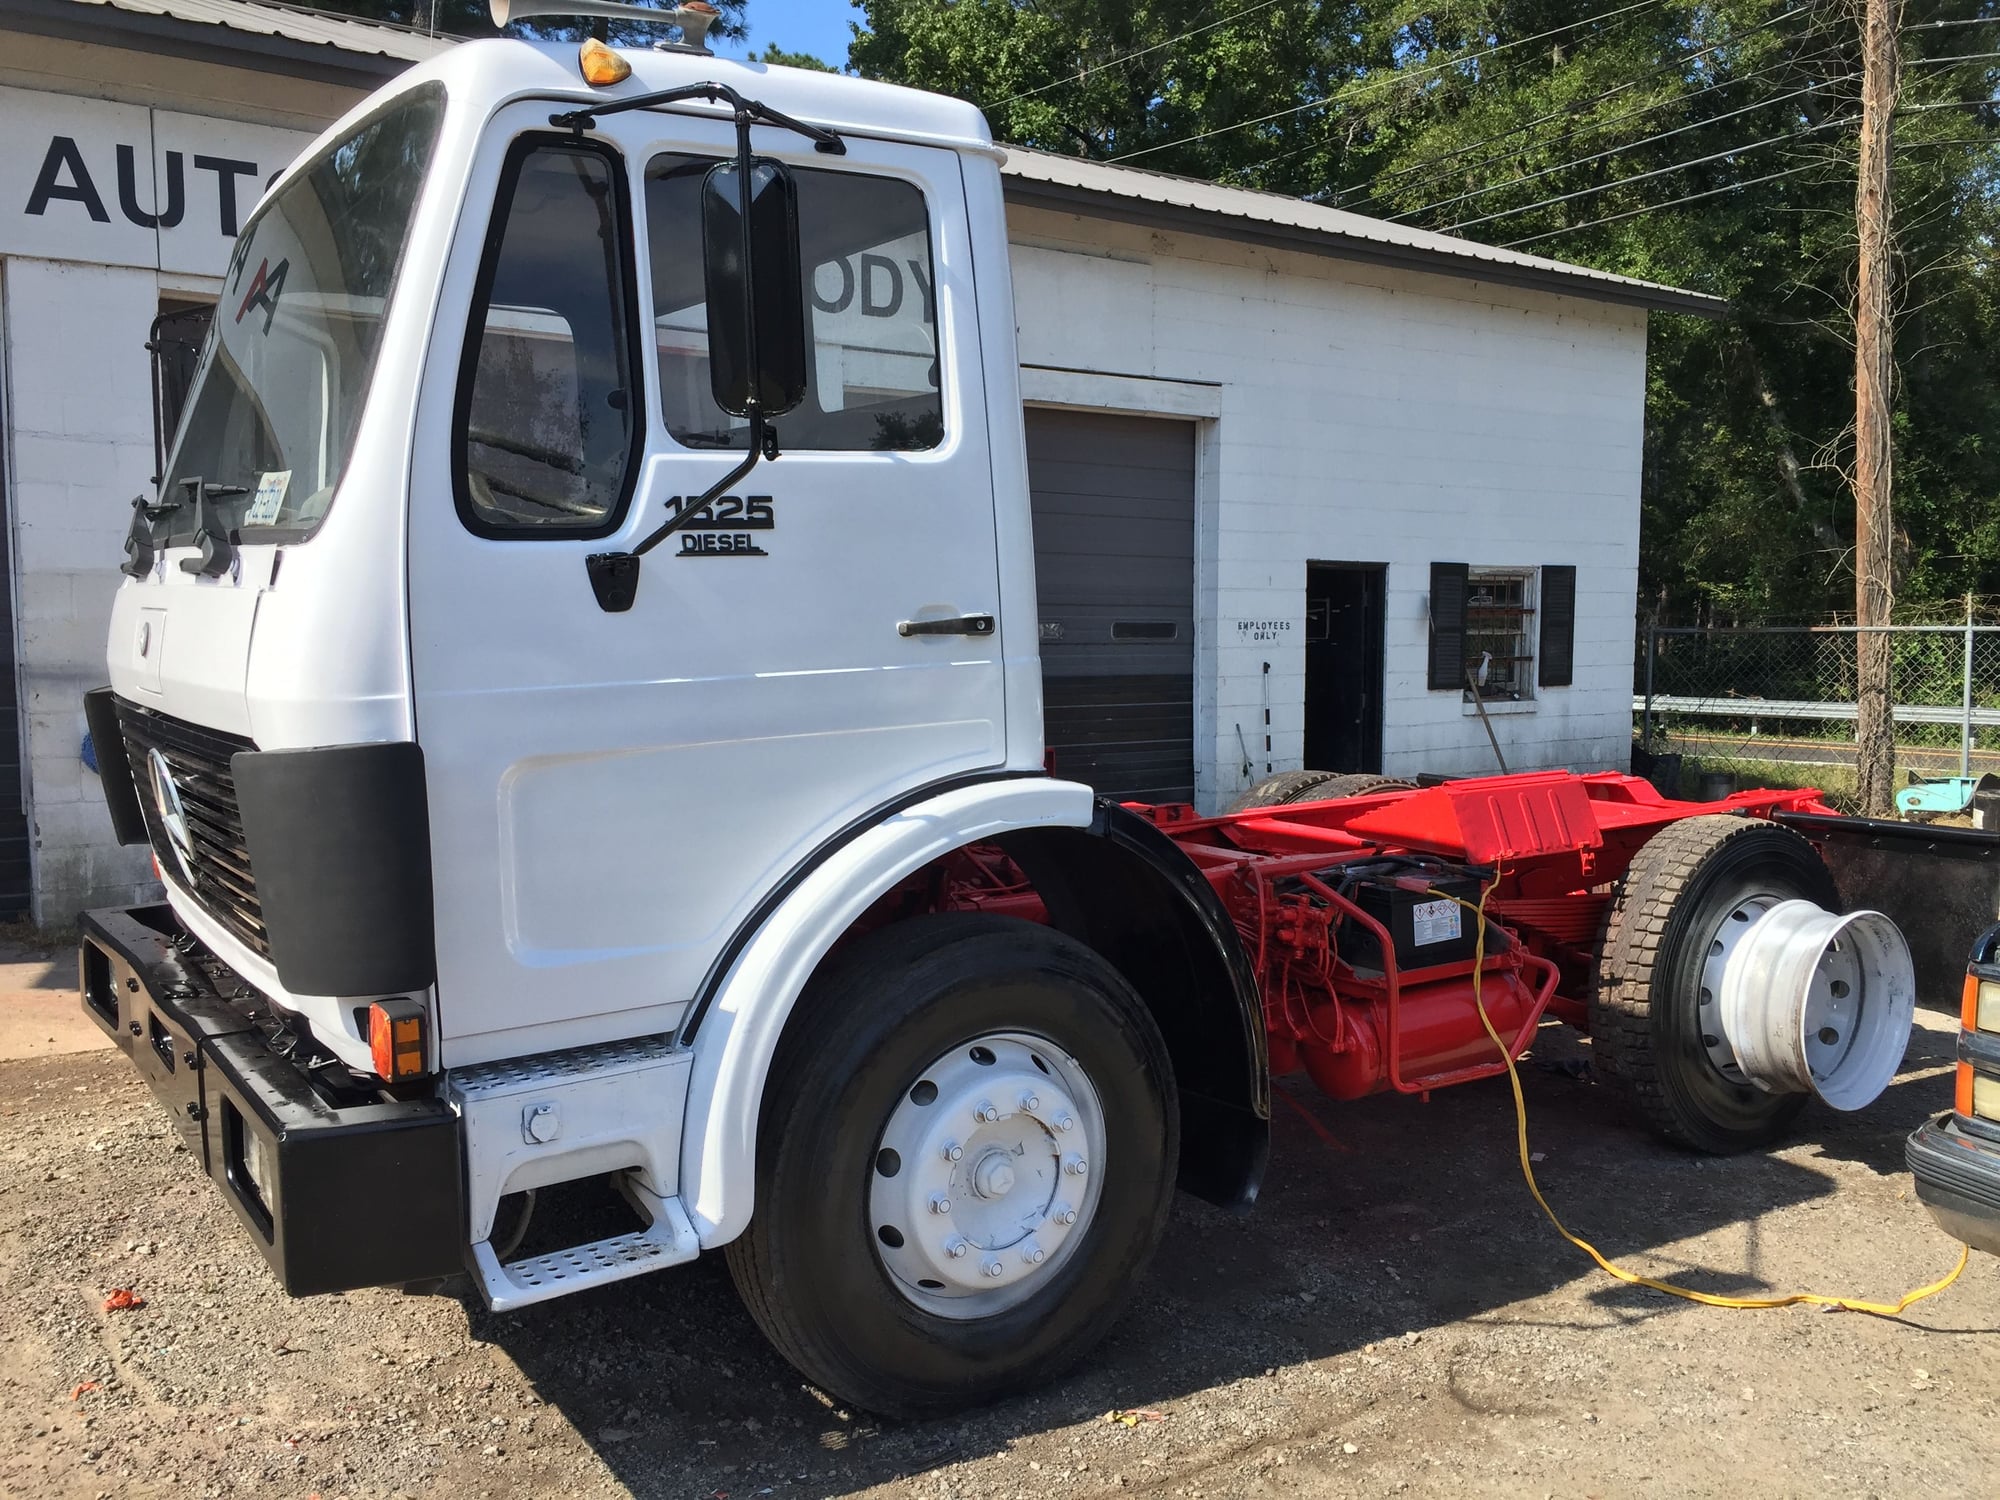 1986 Mercedes-Benz LPS1525 - 1986 Mercedes-Benz LPS1525 NG 6-SPEED TURBODIESEL UNIMOG Semi TRUCK - Used - VIN 1MBZB80A6GN800447 - 5 cyl - 2WD - Manual - Truck - White - Charlotte, NC 28104, United States